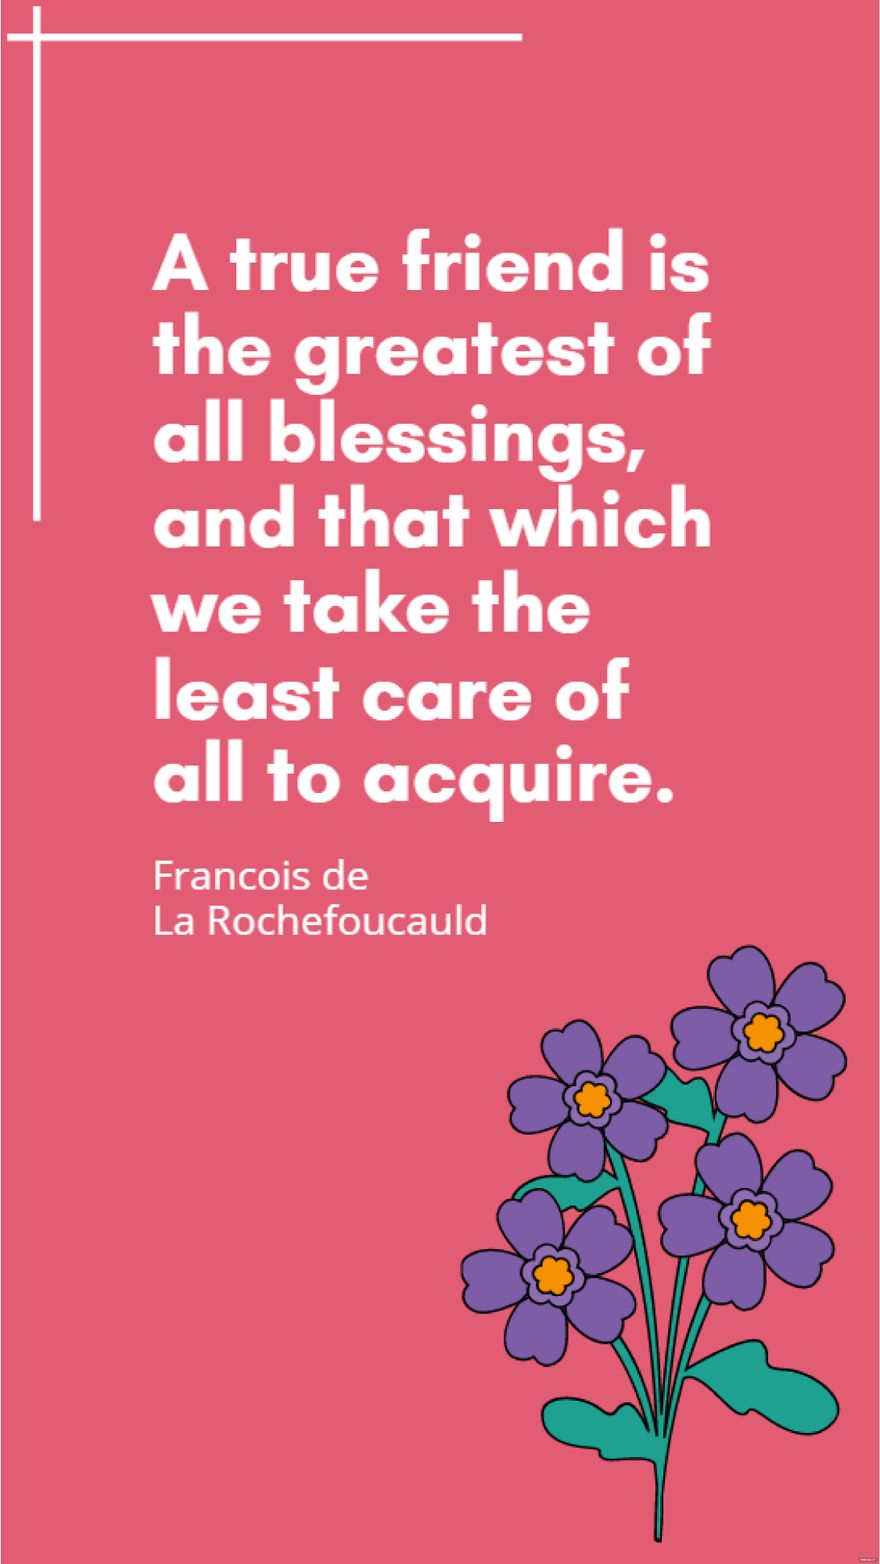 Francois de La Rochefoucauld - A true friend is the greatest of all blessings, and that which we take the least care of all to acquire.